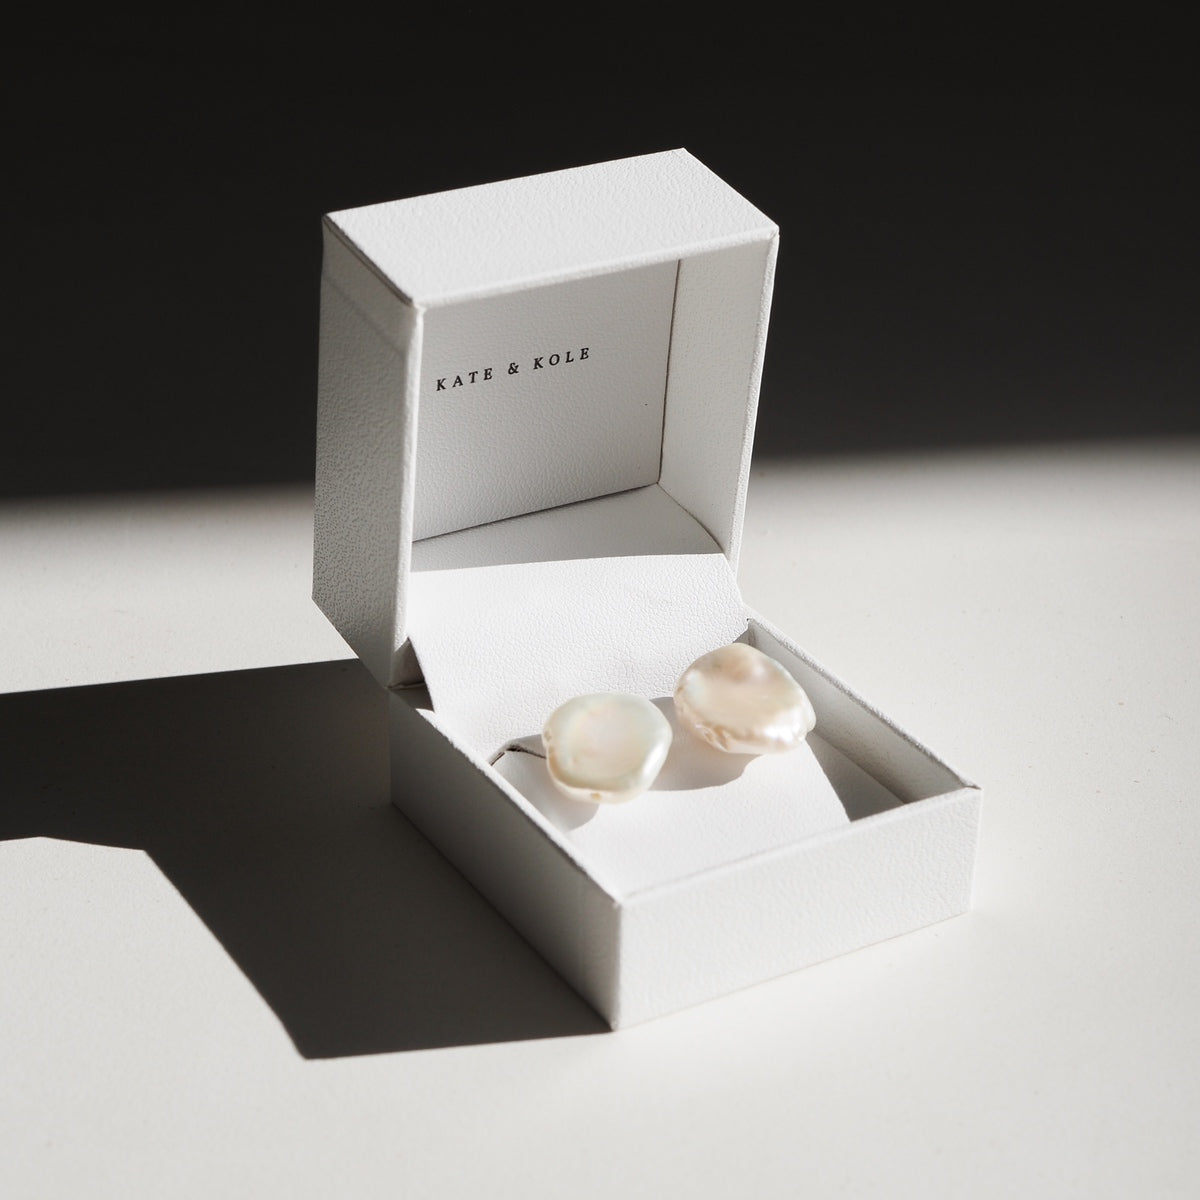 High quality hand made jewellery: our beautiful large baroque pearl studs in 9ct yellow gold sitting perfectly in our Kate & Kole jewellery box